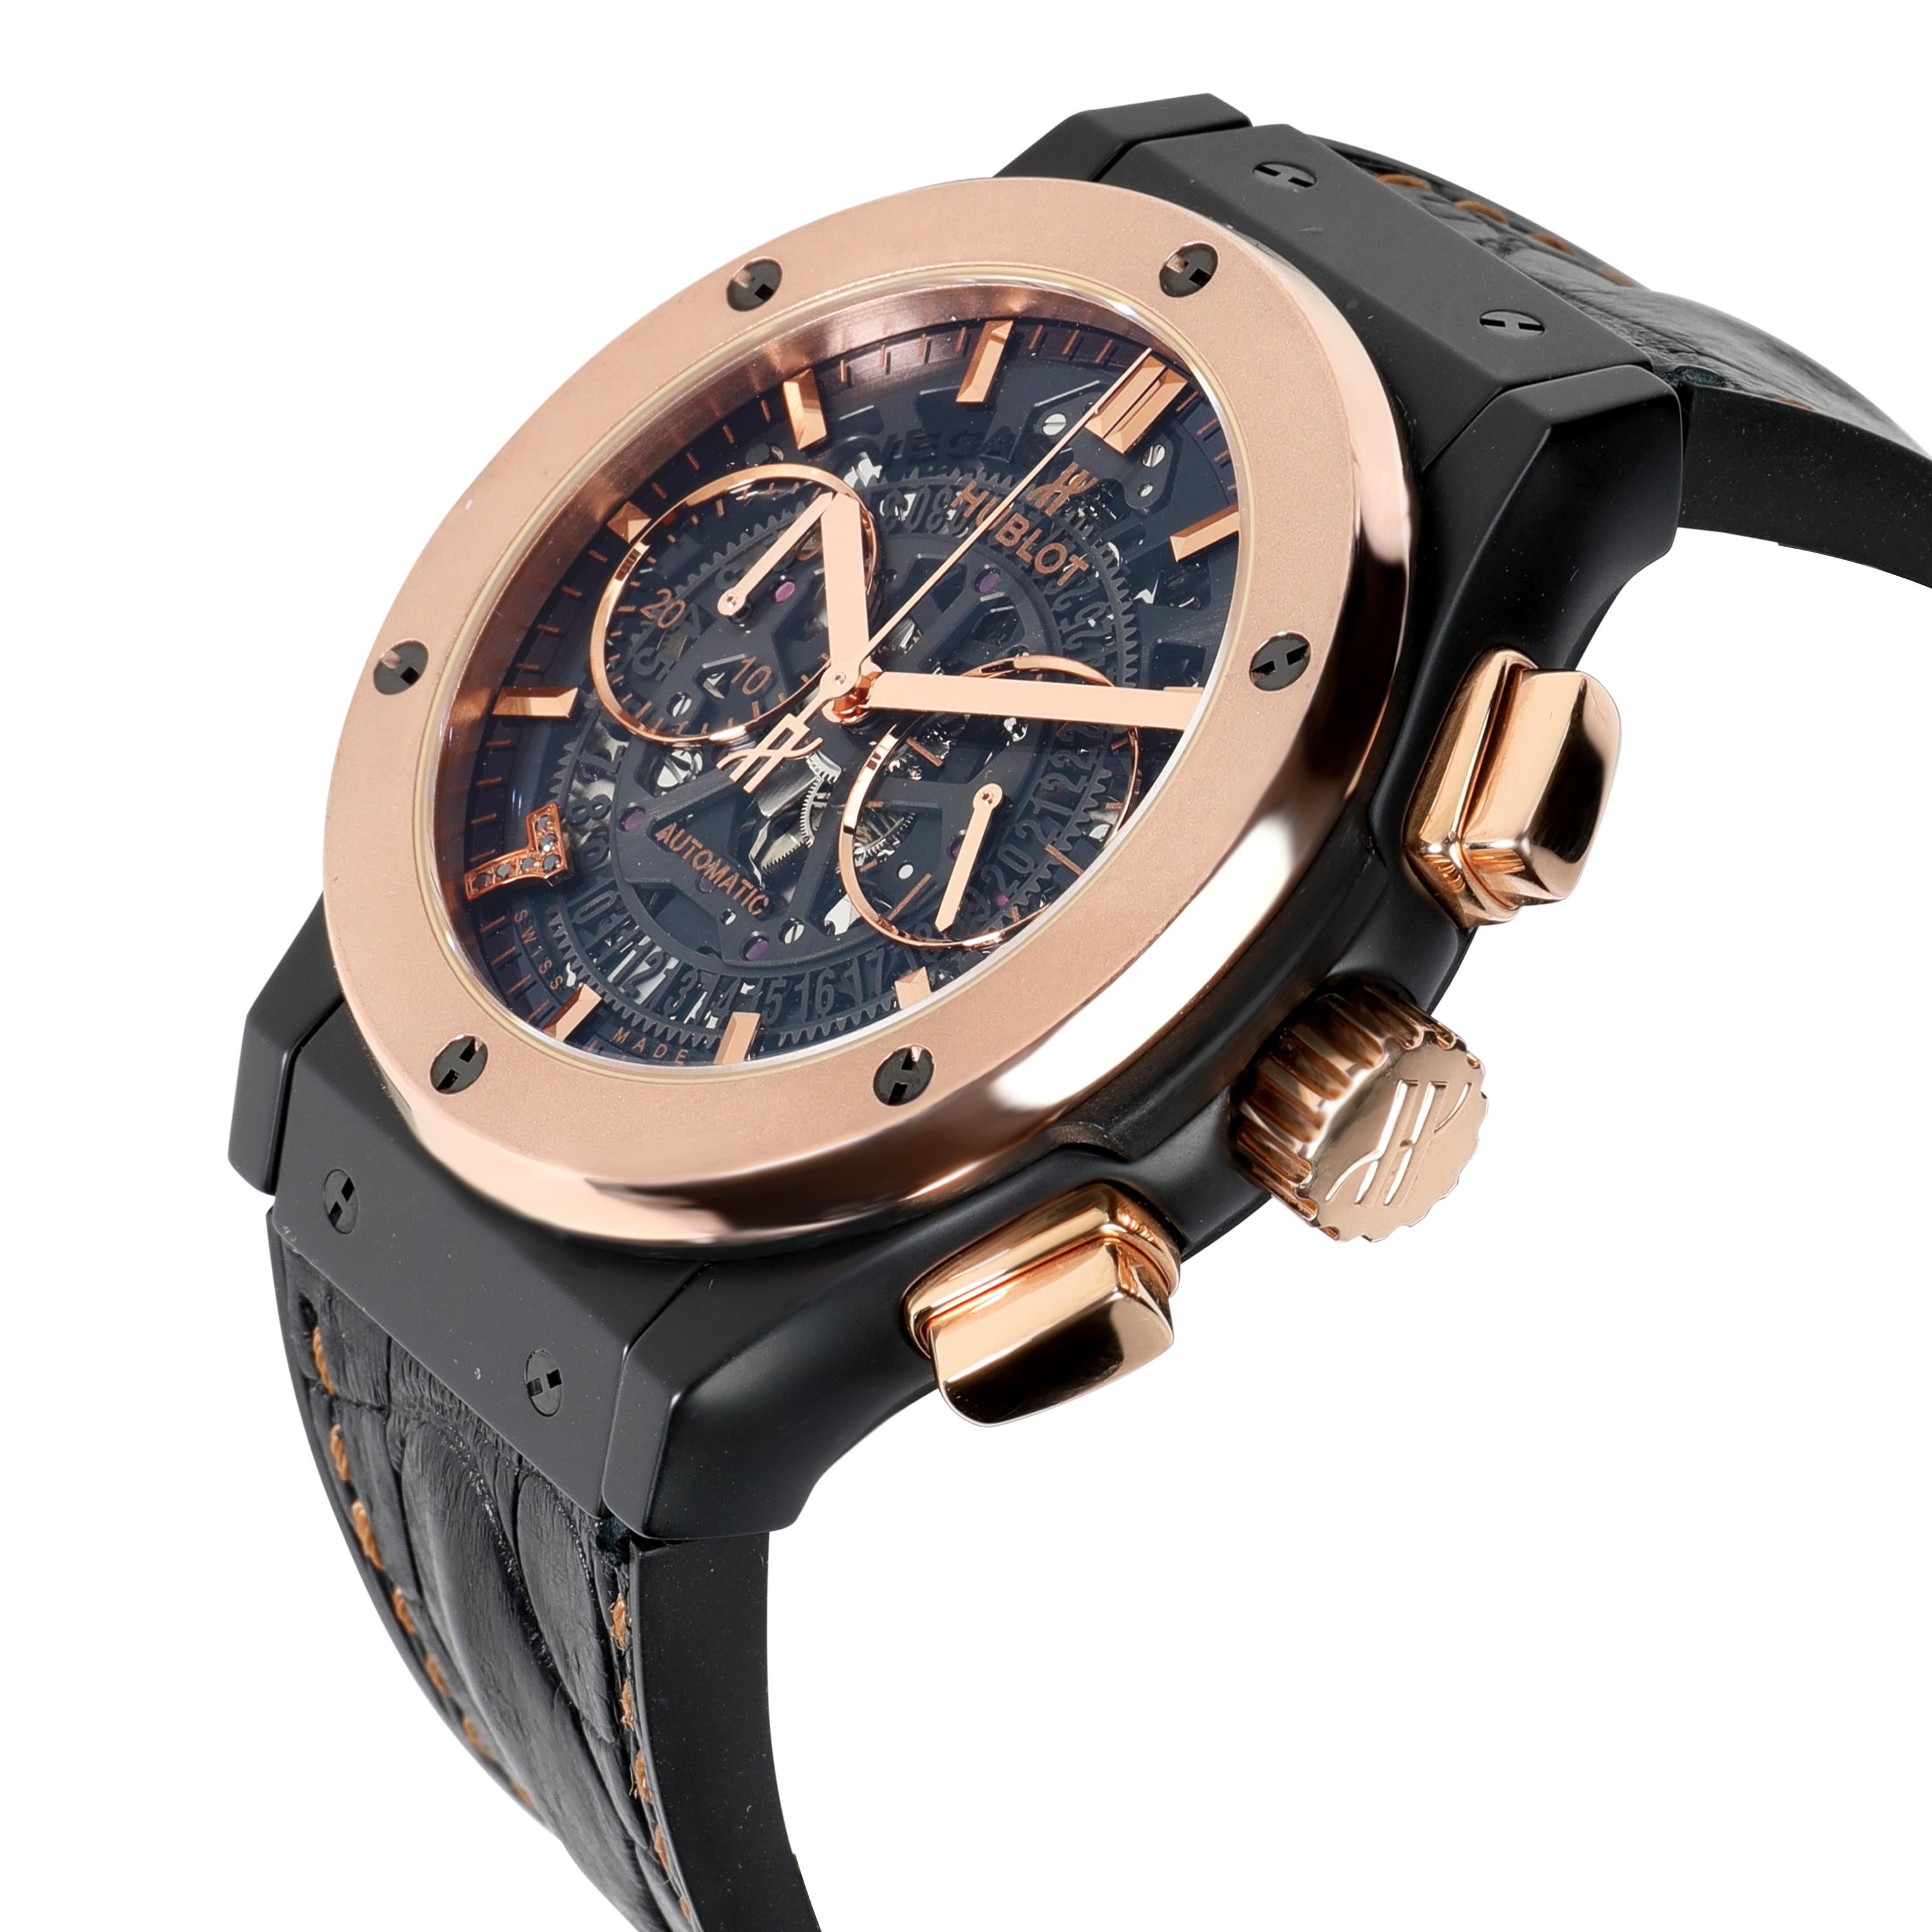 
Hublot Classic Fusion Vegas 525.CO.0181.HR.LVB16 Men's Watch in 18kt Rose Gold

SKU: 106579

PRIMARY DETAILS
Brand:  Hublot
Model: Classic Fusion Vegas
Country of Origin: Switzerland
Movement Type: Mechanical: Automatic/Kinetic
Year Manufactured: